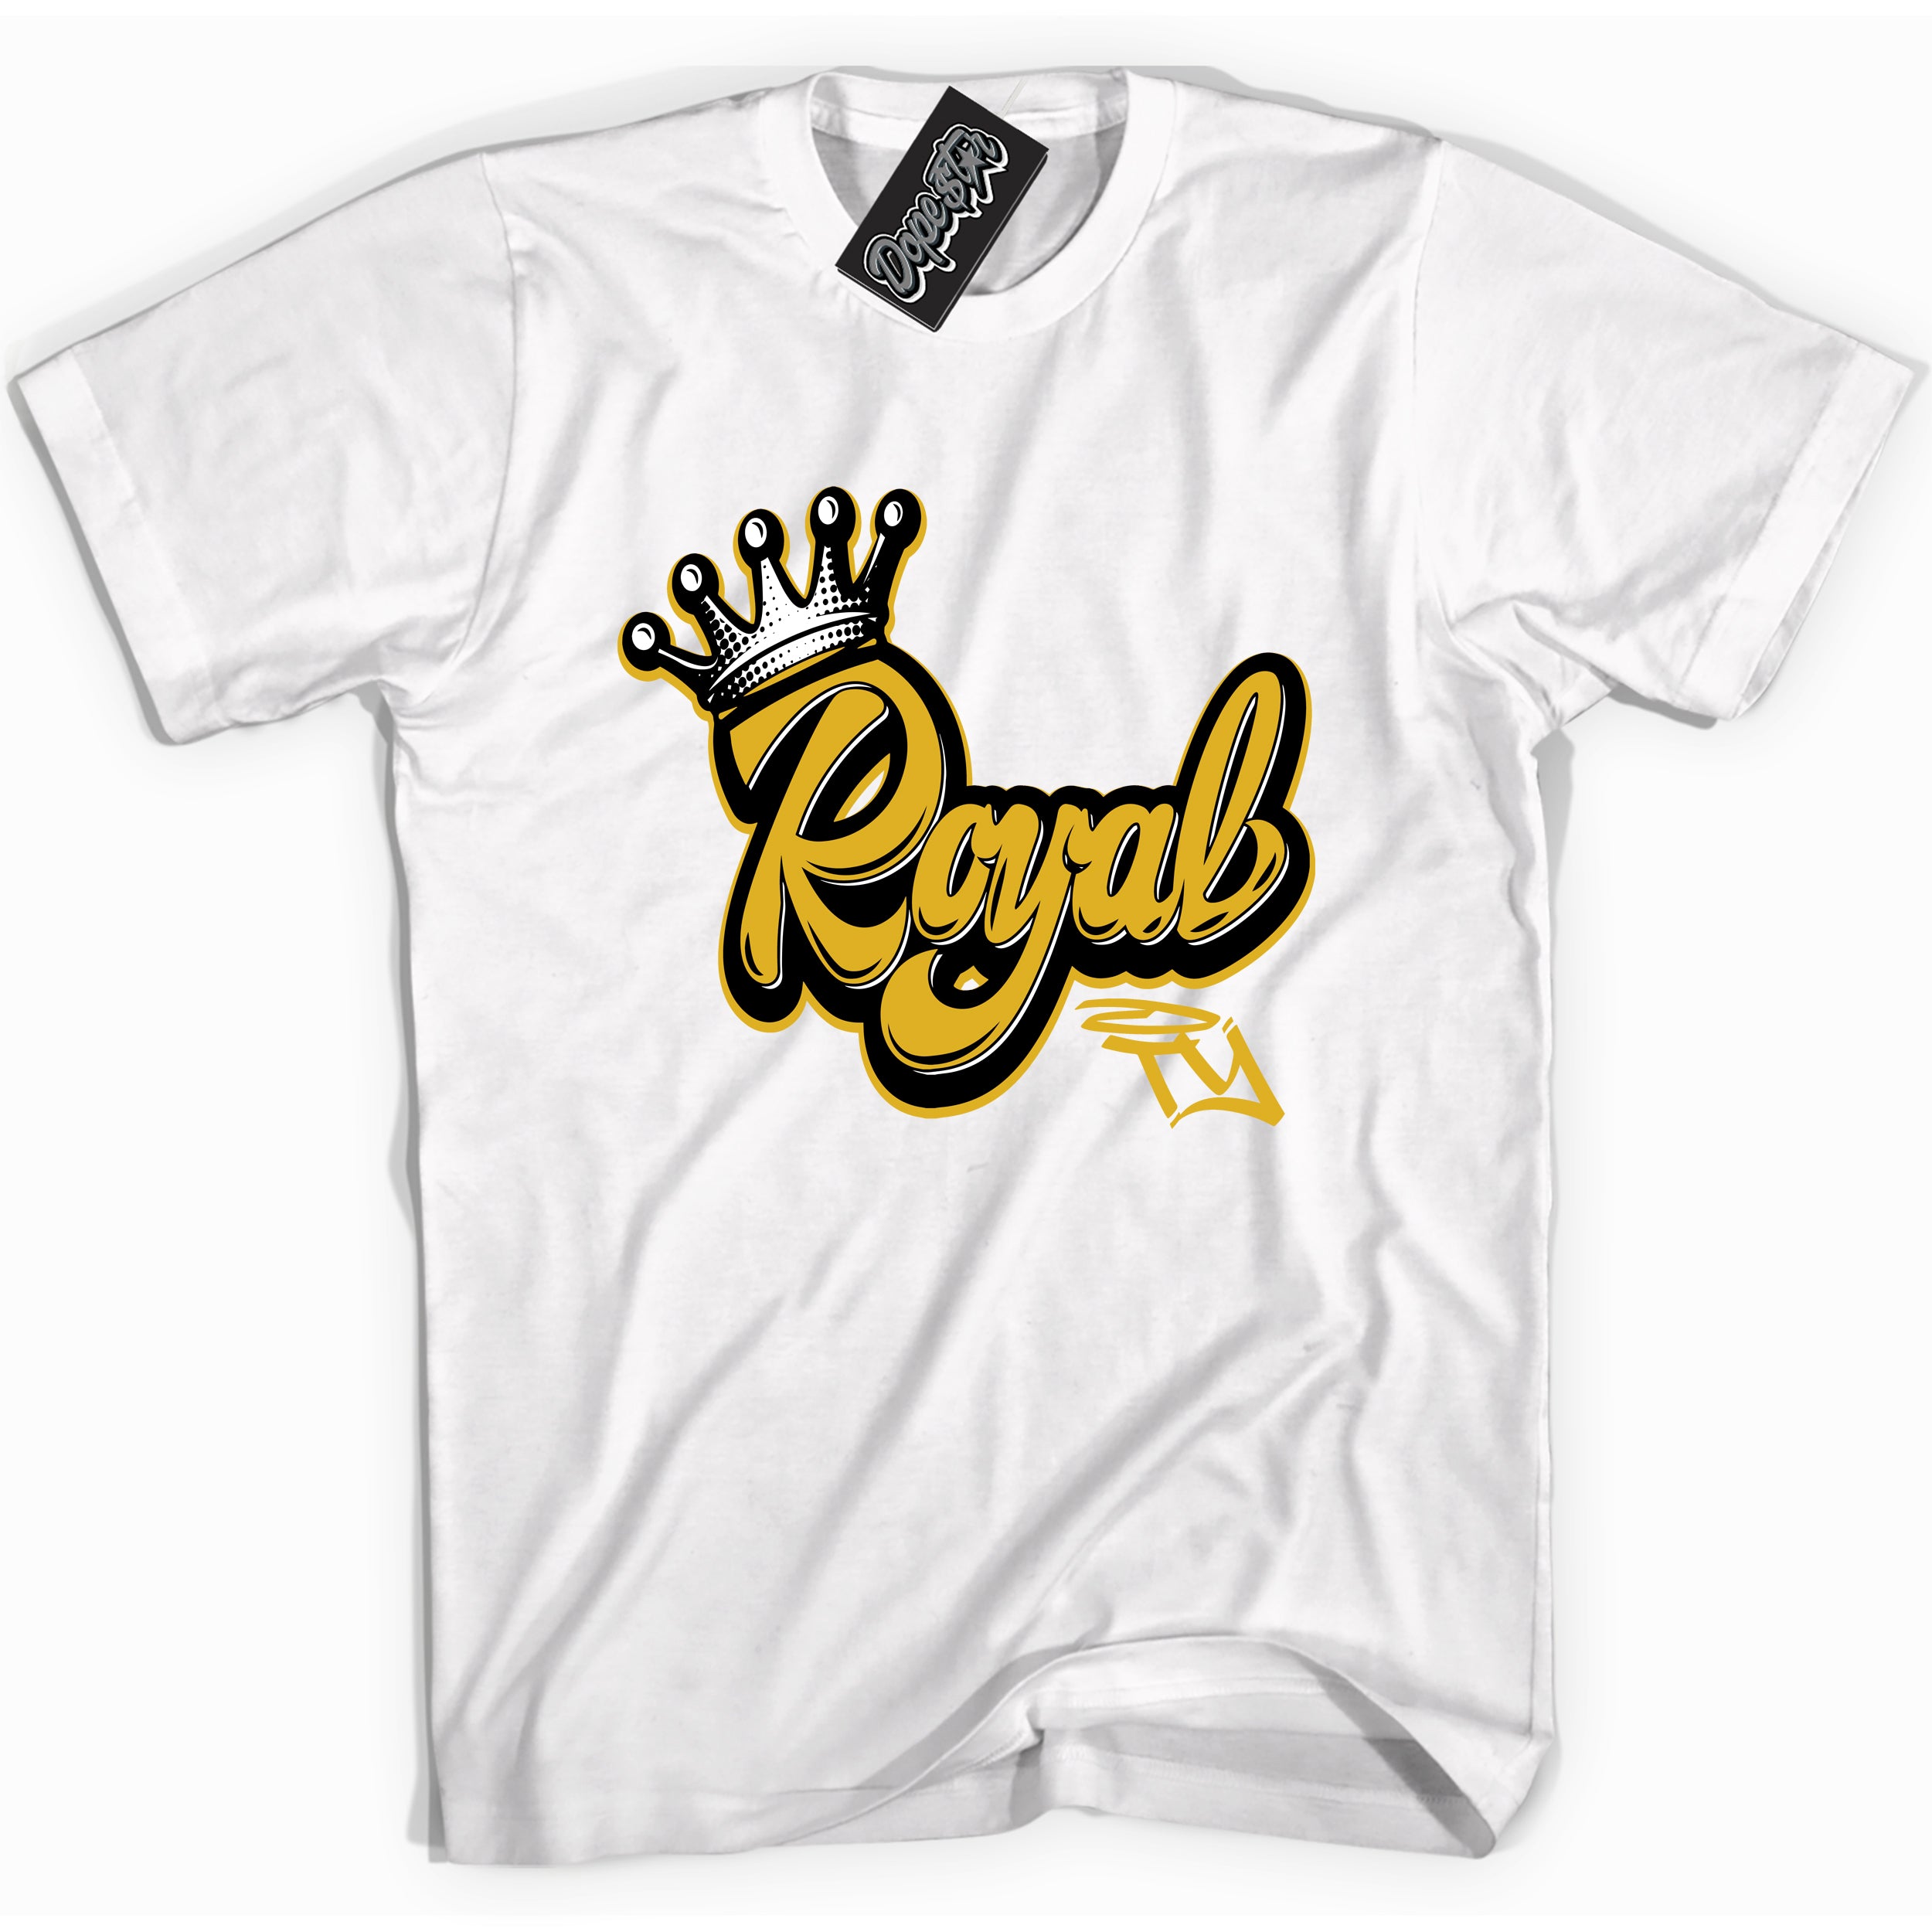 Cool White Shirt with “ Royalty” design that perfectly matches Yellow Ochre 6s Sneakers.